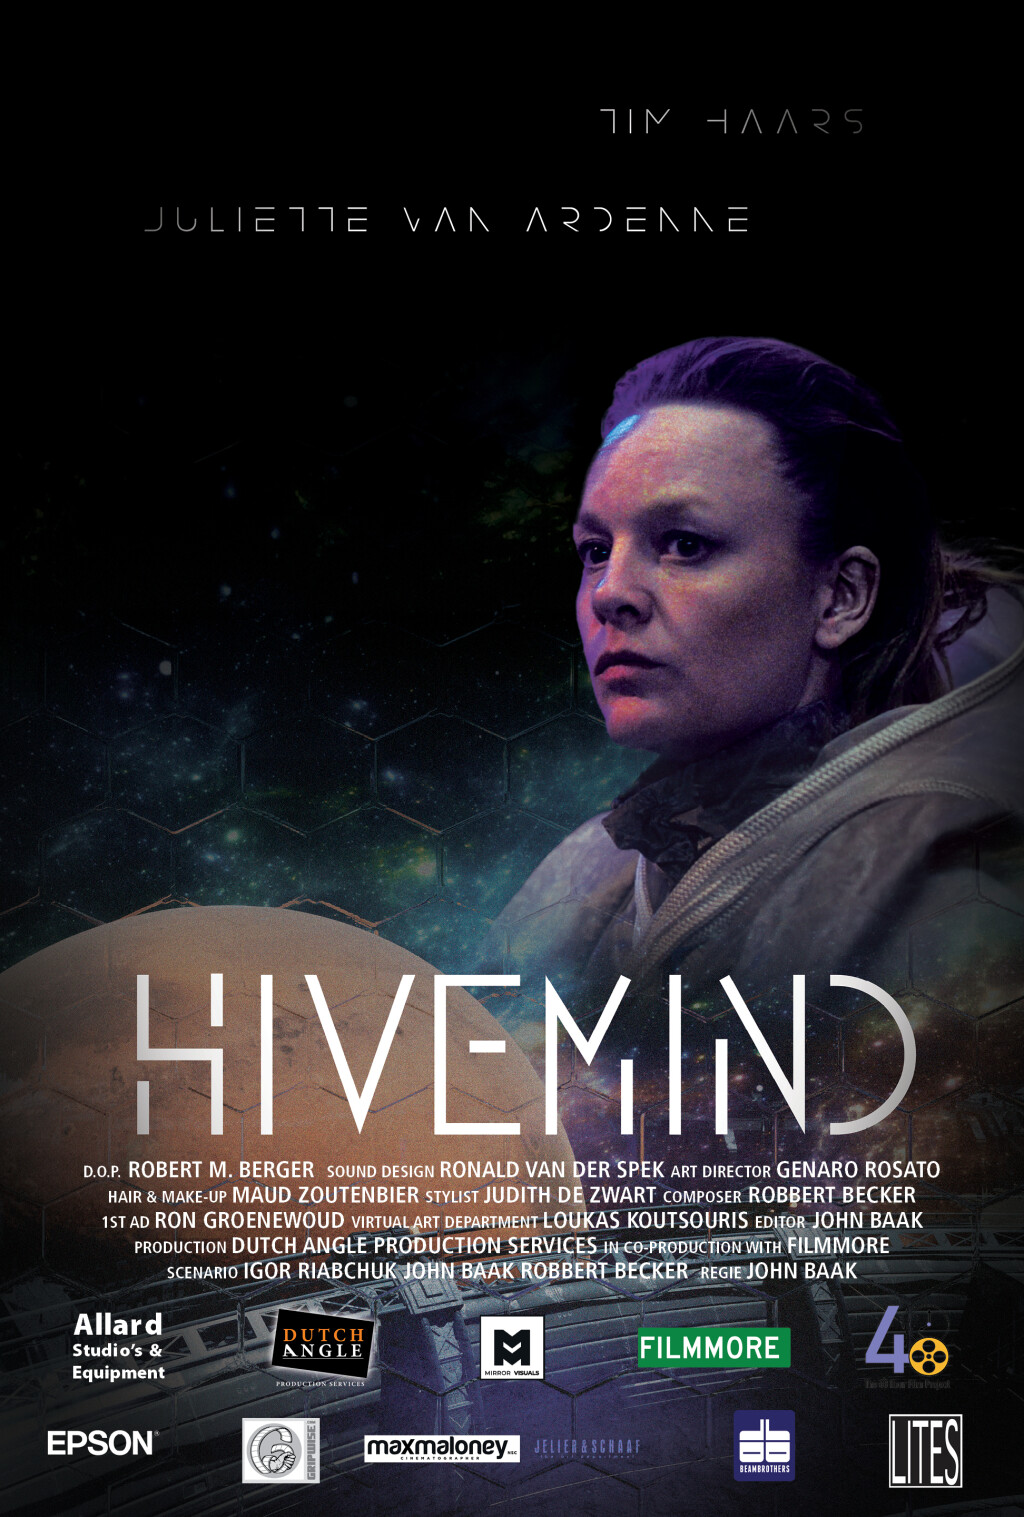 Filmposter for Hivemind